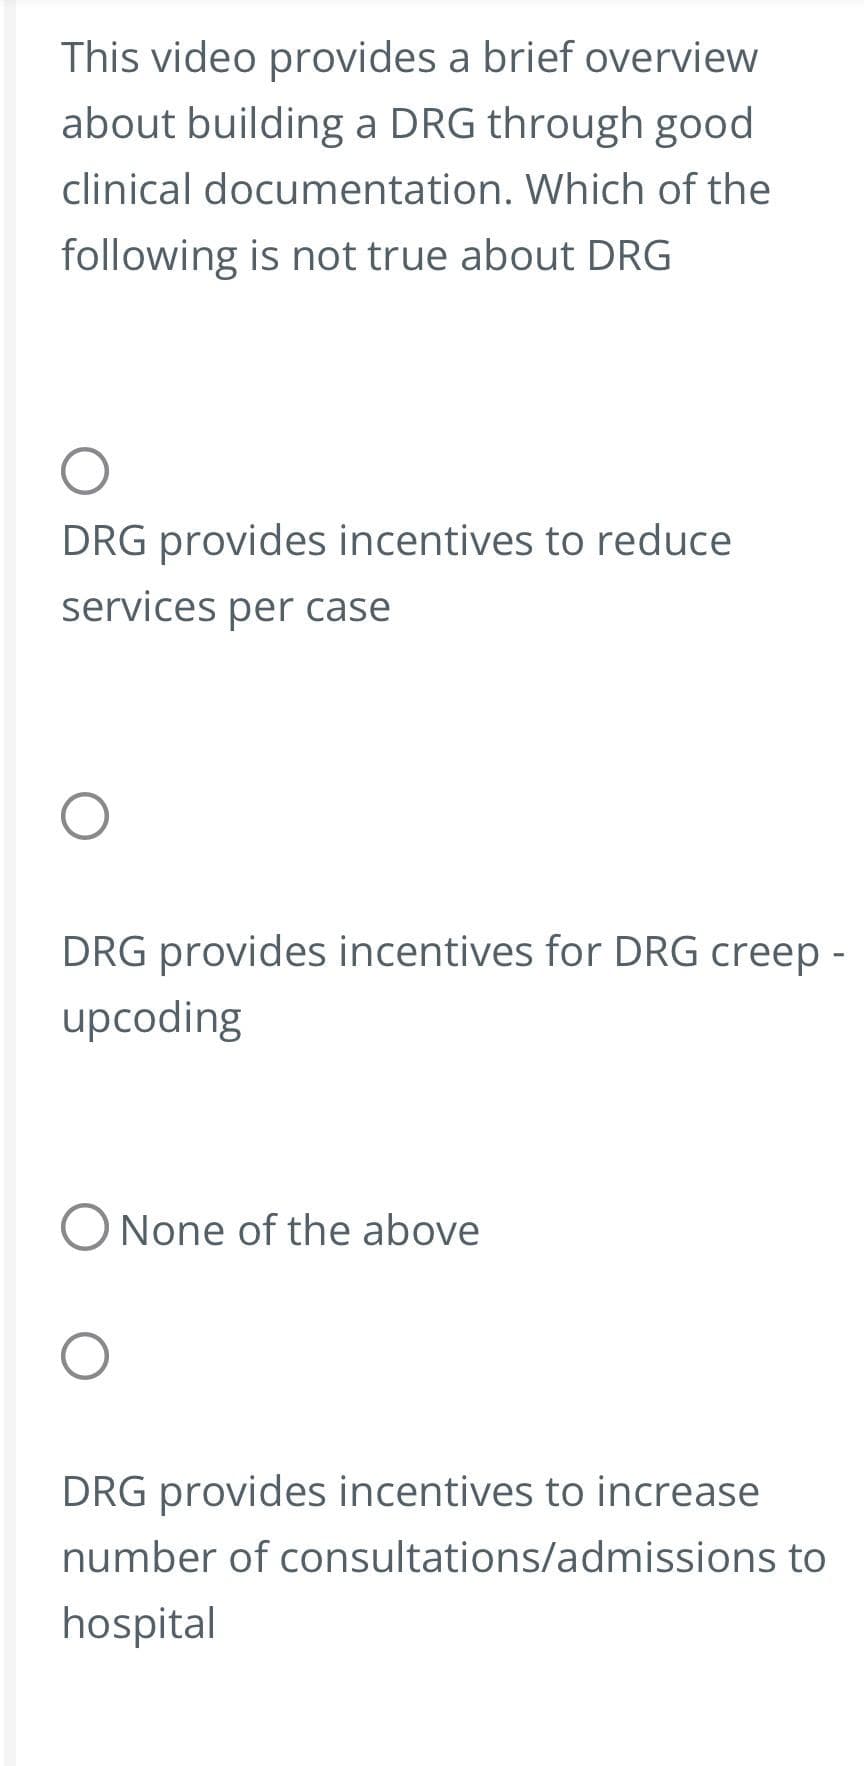 This video provides a brief overview
about building a DRG through good
clinical documentation. Which of the
following is not true about DRG
DRG provides incentives to reduce
services per case
DRG provides incentives for DRG creep -
upcoding
O None of the above
DRG provides incentives to increase
number of consultations/admissions to
hospital